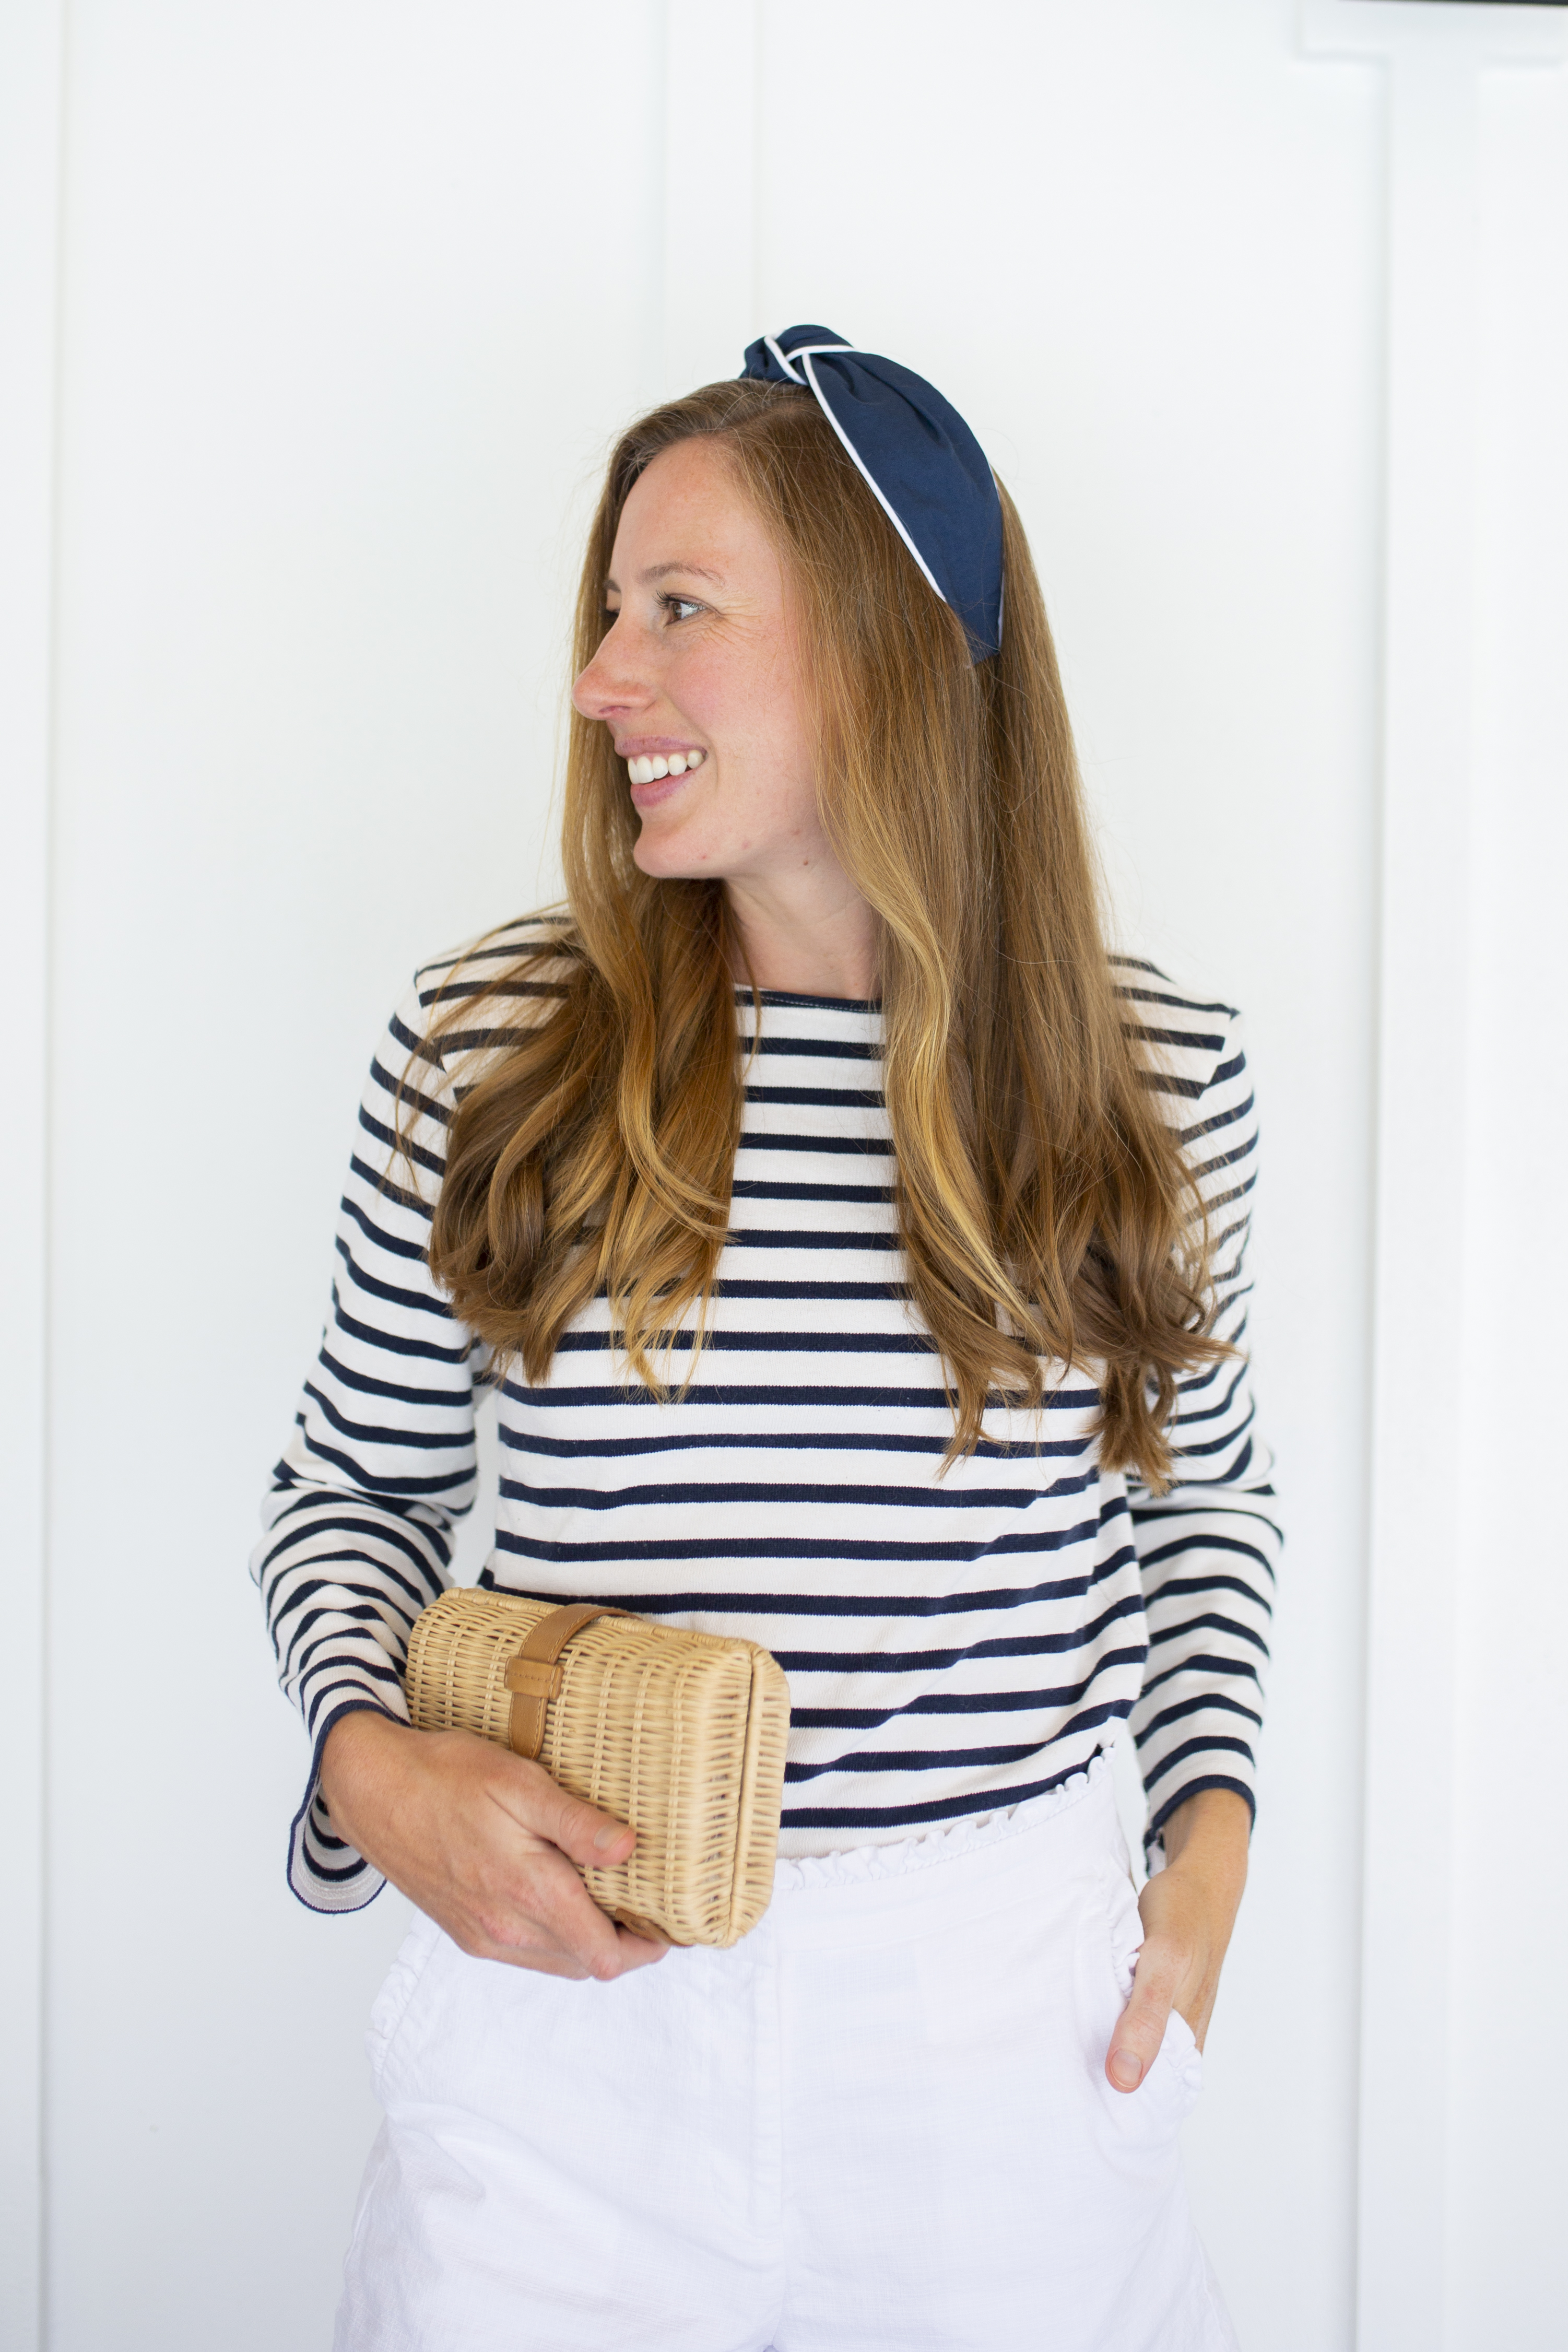 Sunshine Style Co. navy and white piped headband a long sleeve striped top with white shorts and straw bag 